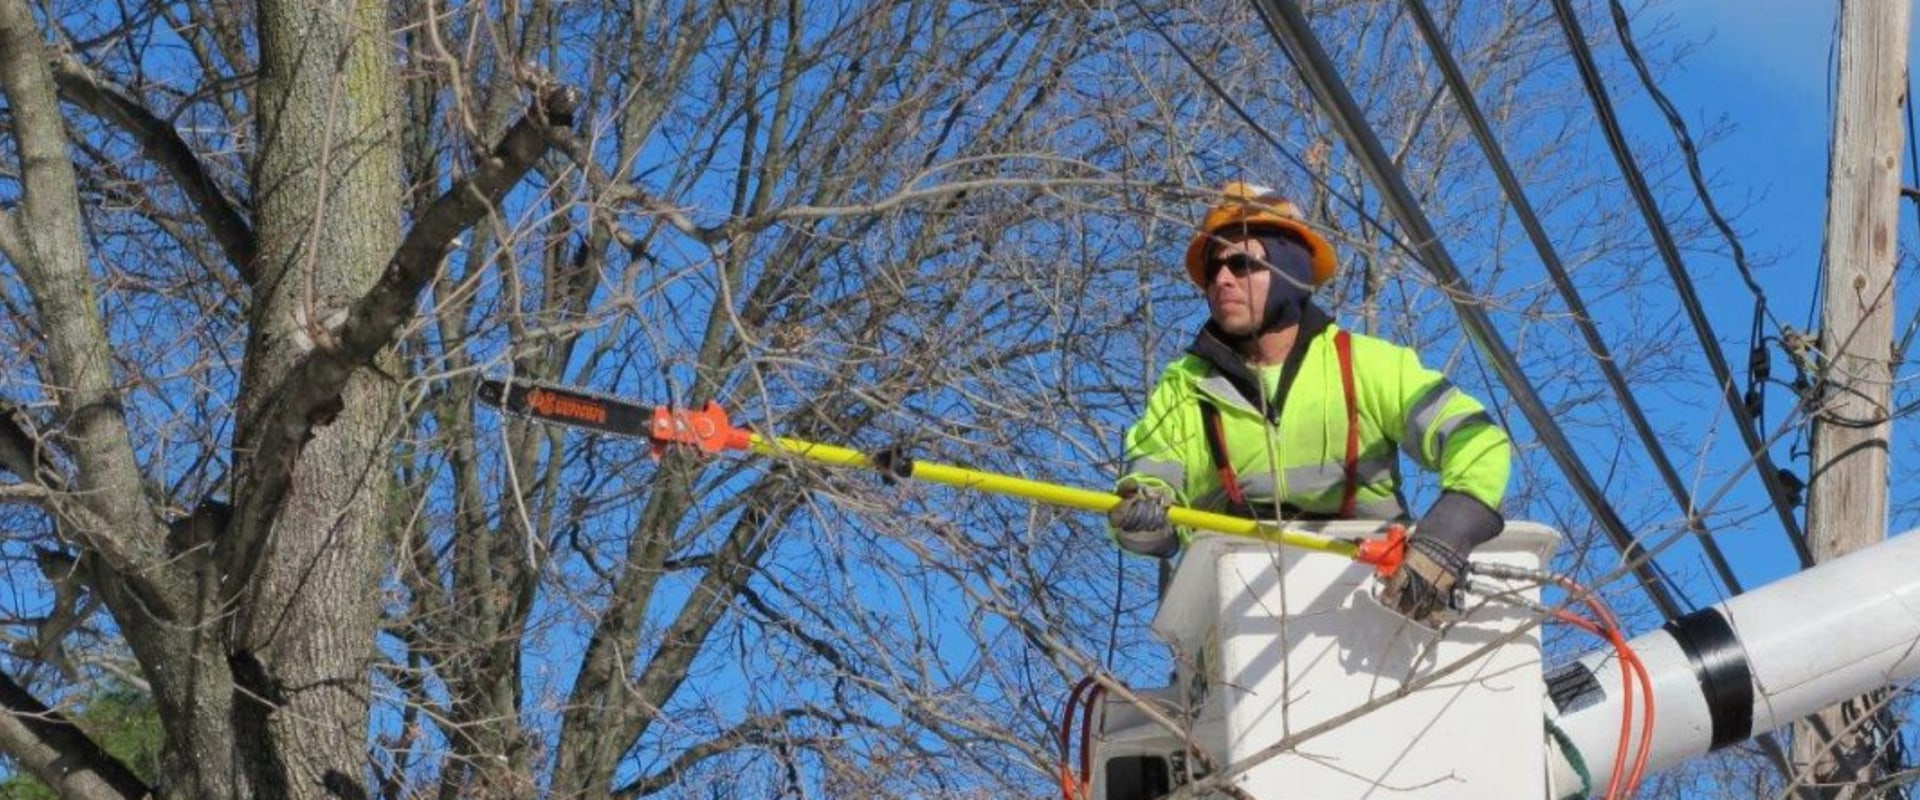 Planting Trees Near Power Lines: What You Need to Know